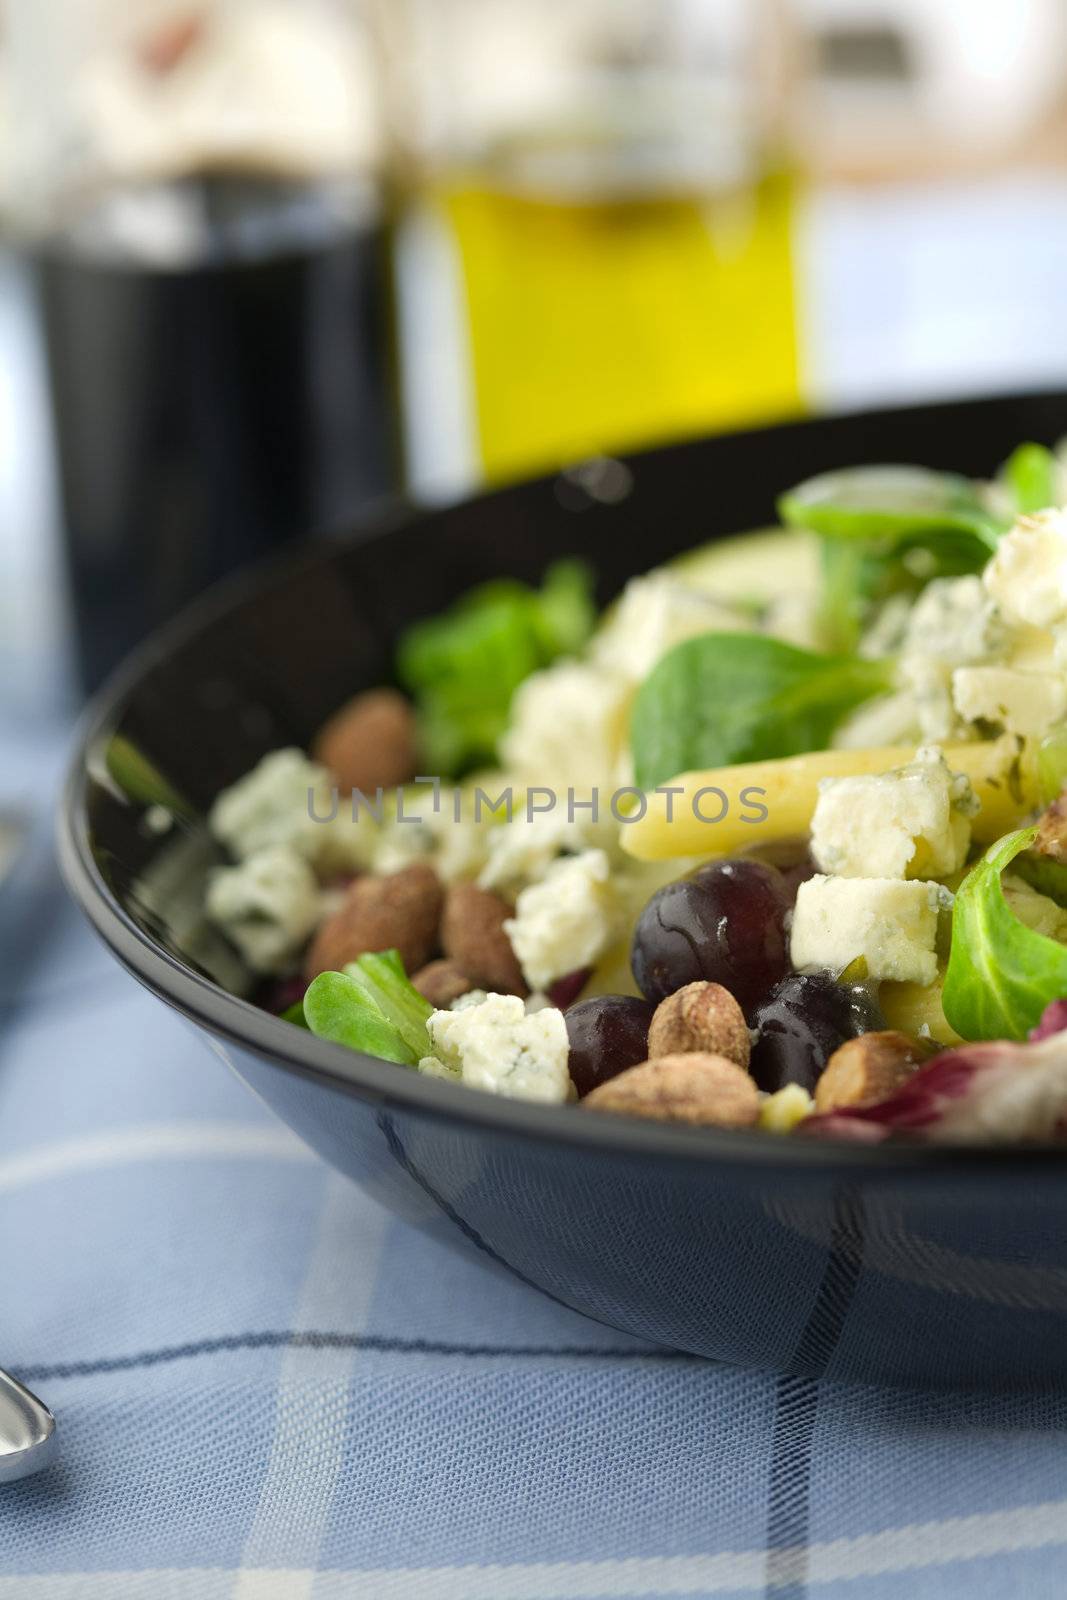 Delicious salad with nuts, fruit, pasta and blue cheese